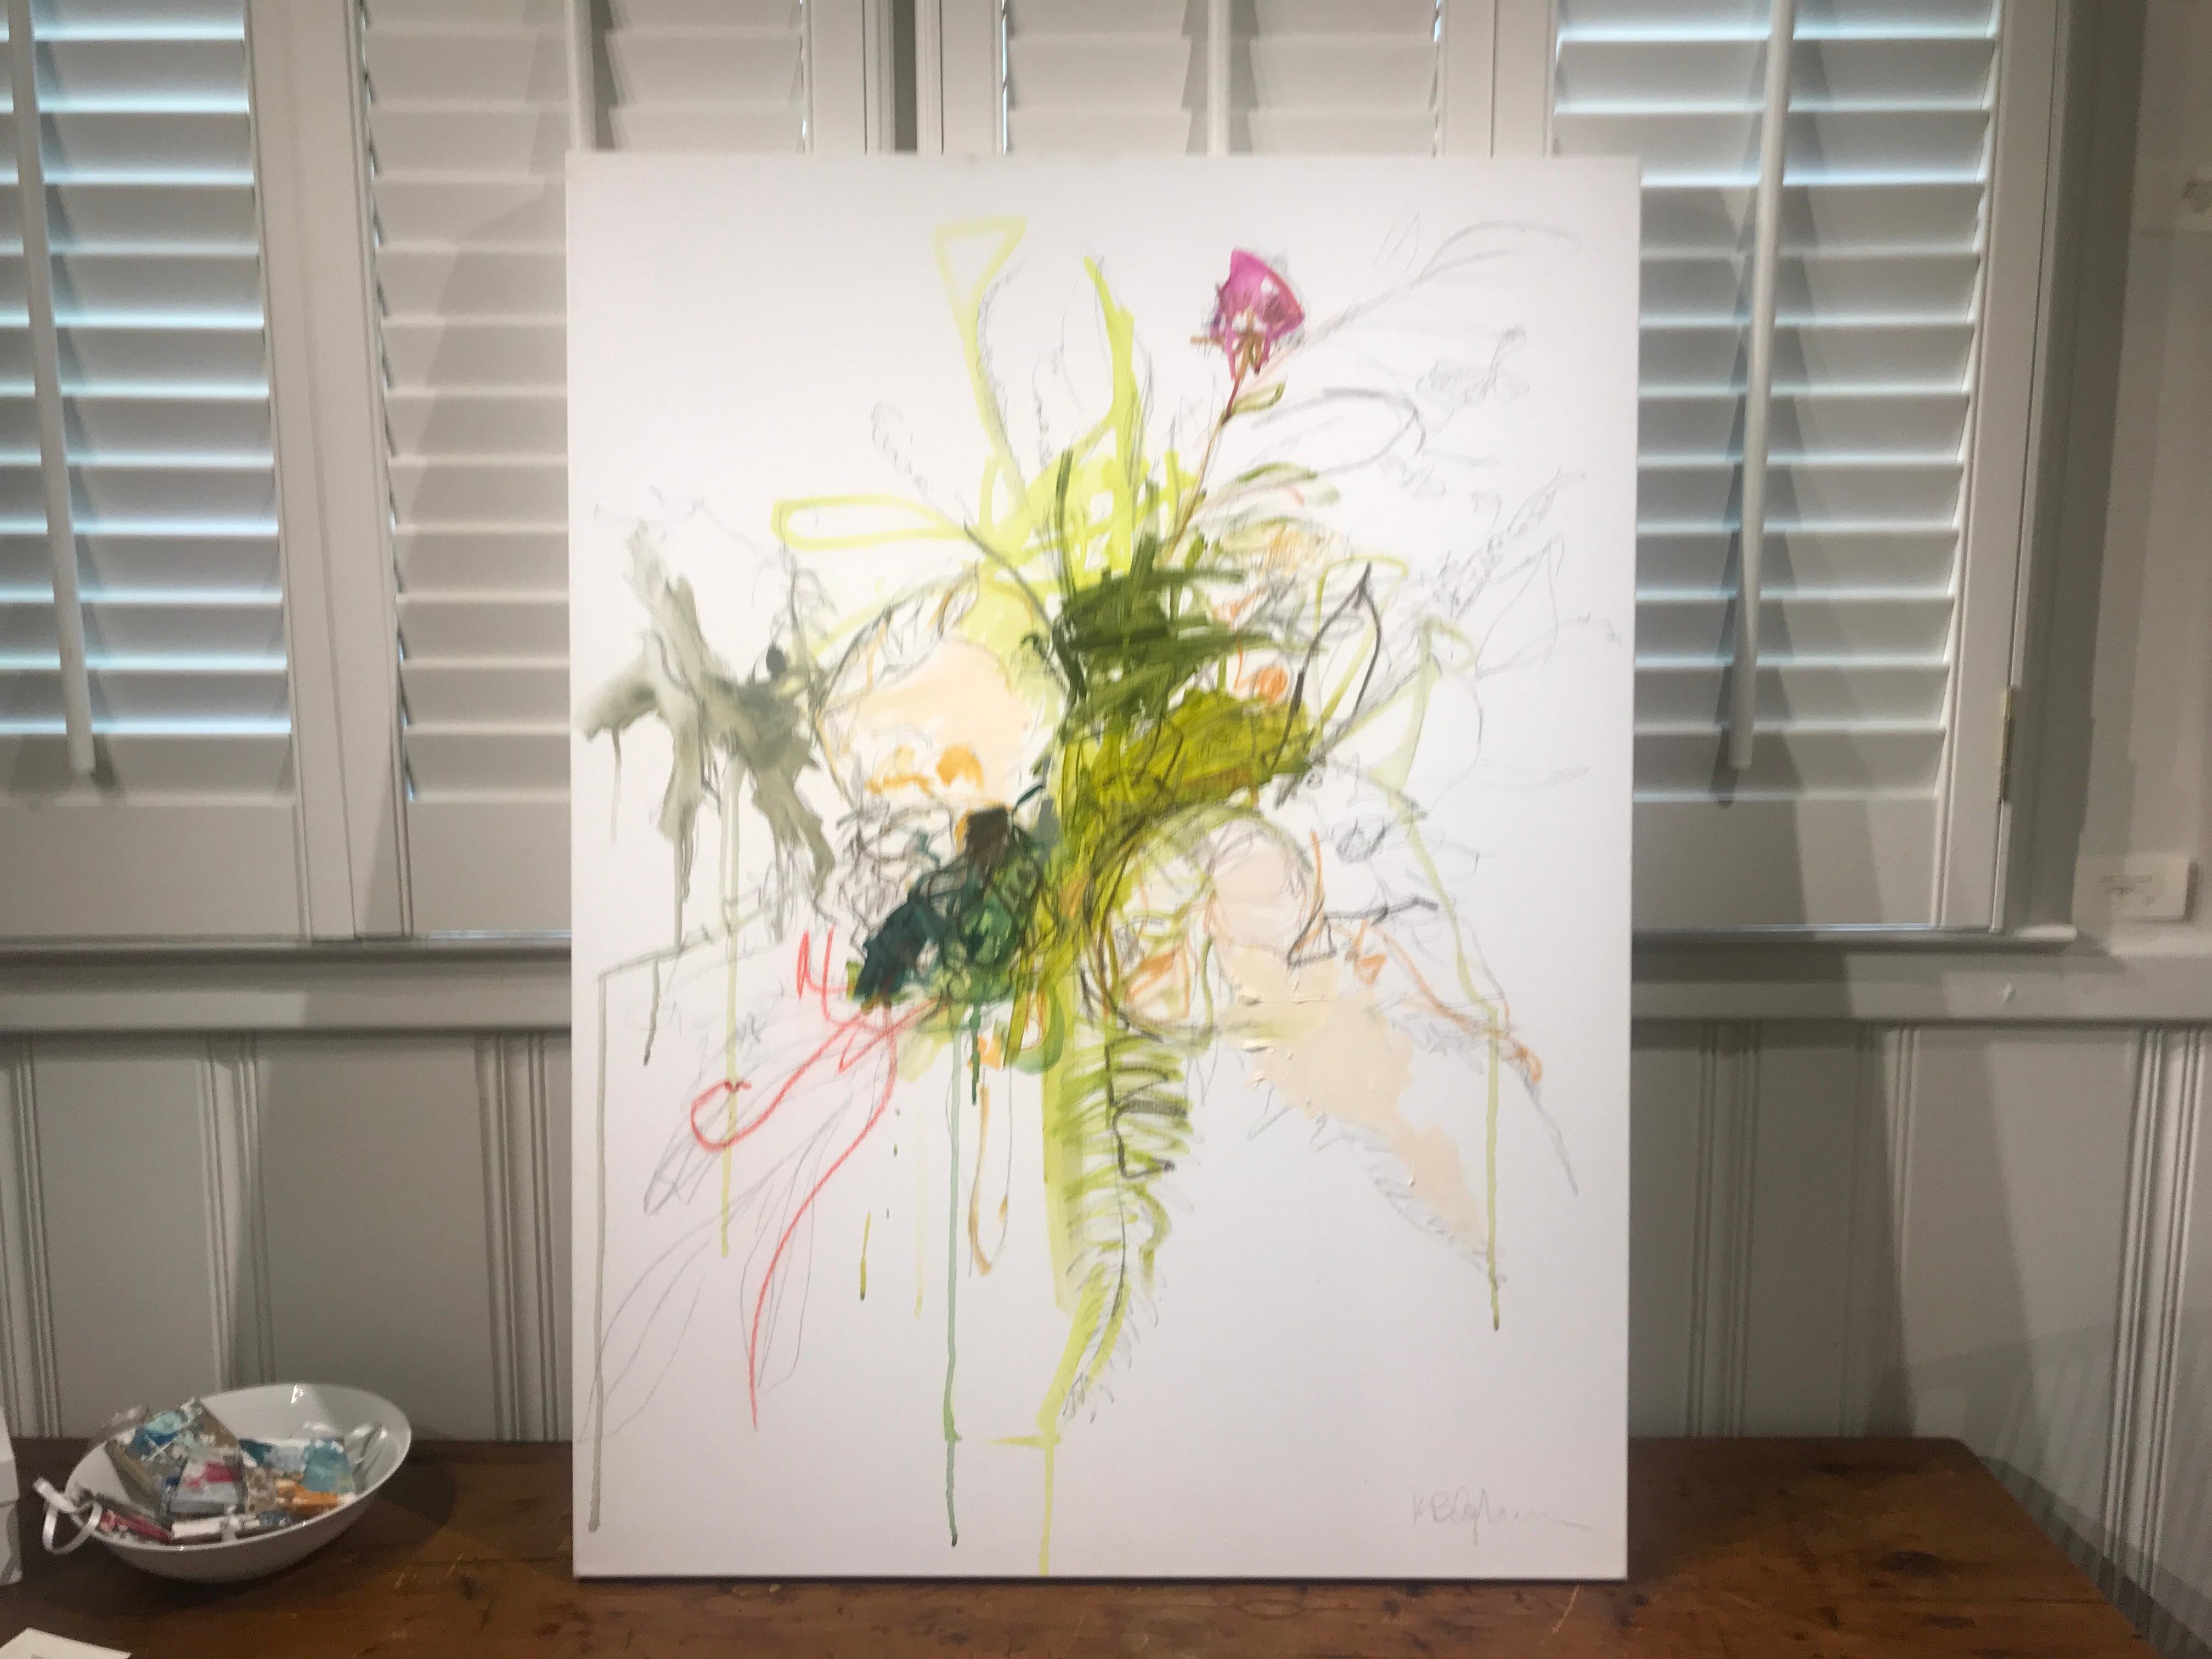 'Revolution' is a medium size mixed media on canvas abstract floral painting created by American artist Kelley Ogburn in 2019. Featuring a palette made of green and pink tones among others, this painting captures our attention with its bold and